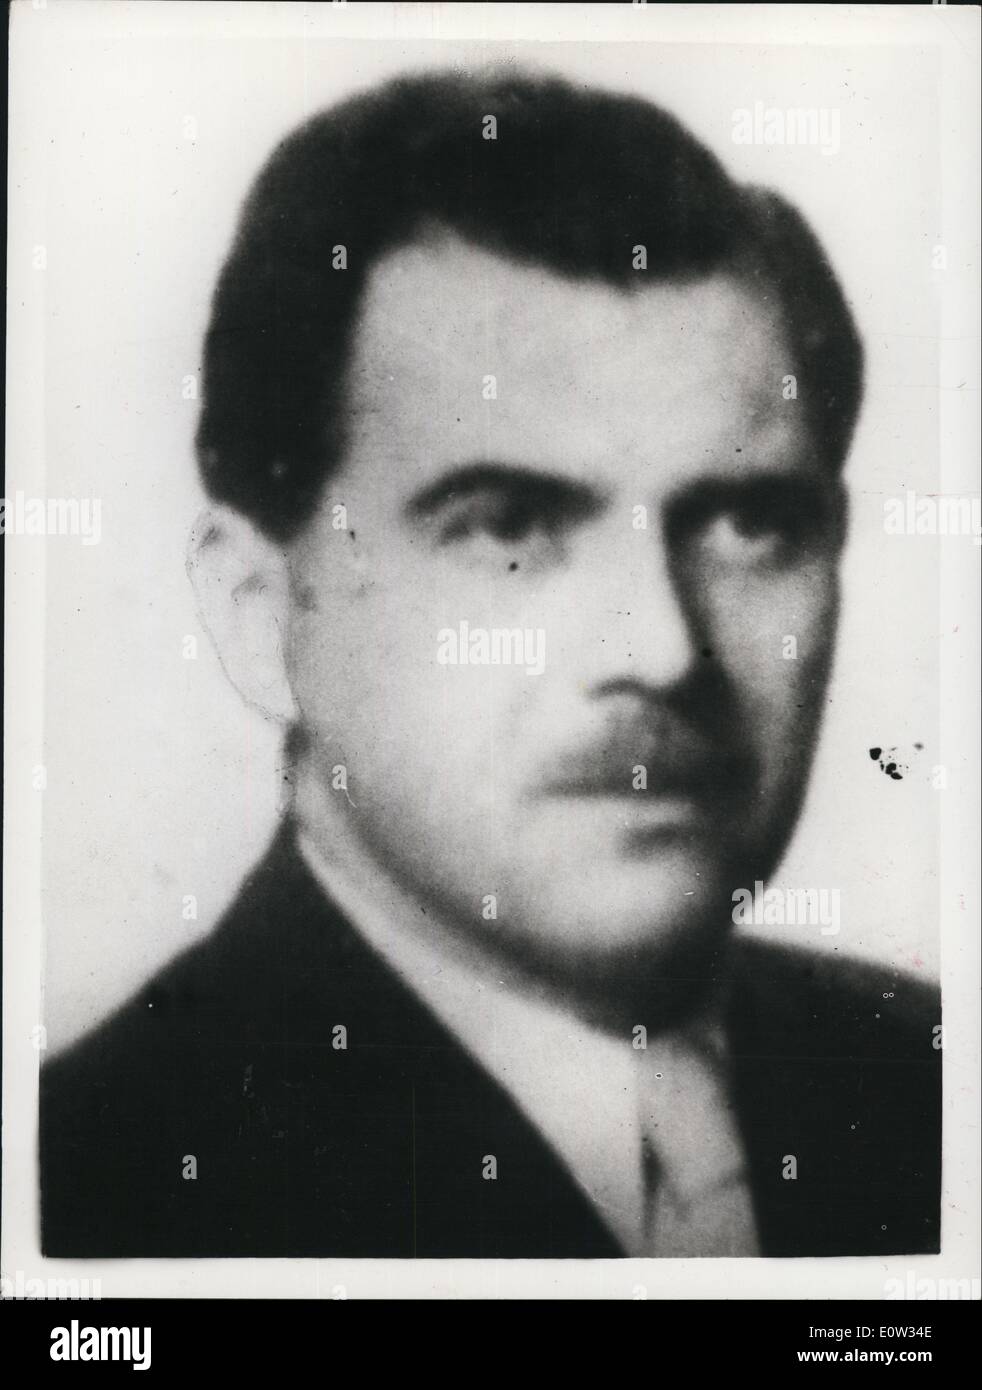 Mar. 03, 1961 - The doctor of Auschwitz-reported seized by Israeli agents... Joseph Mengele, the long sought doctor of the Auschwitz horror camp-is reported to have been seized by Israeli Secret Service Agents in Argentina-and is said to be on way to Israel bysea... Mengele-said to be notorious for his fantastic experiments on women and babies-is expected to be a witness at the trial of Adolf Eichmann-accused of the mass slaughter of Jews at Auschwitz. The trial of Eichmann opens a Jerusalem next month Stock Photo